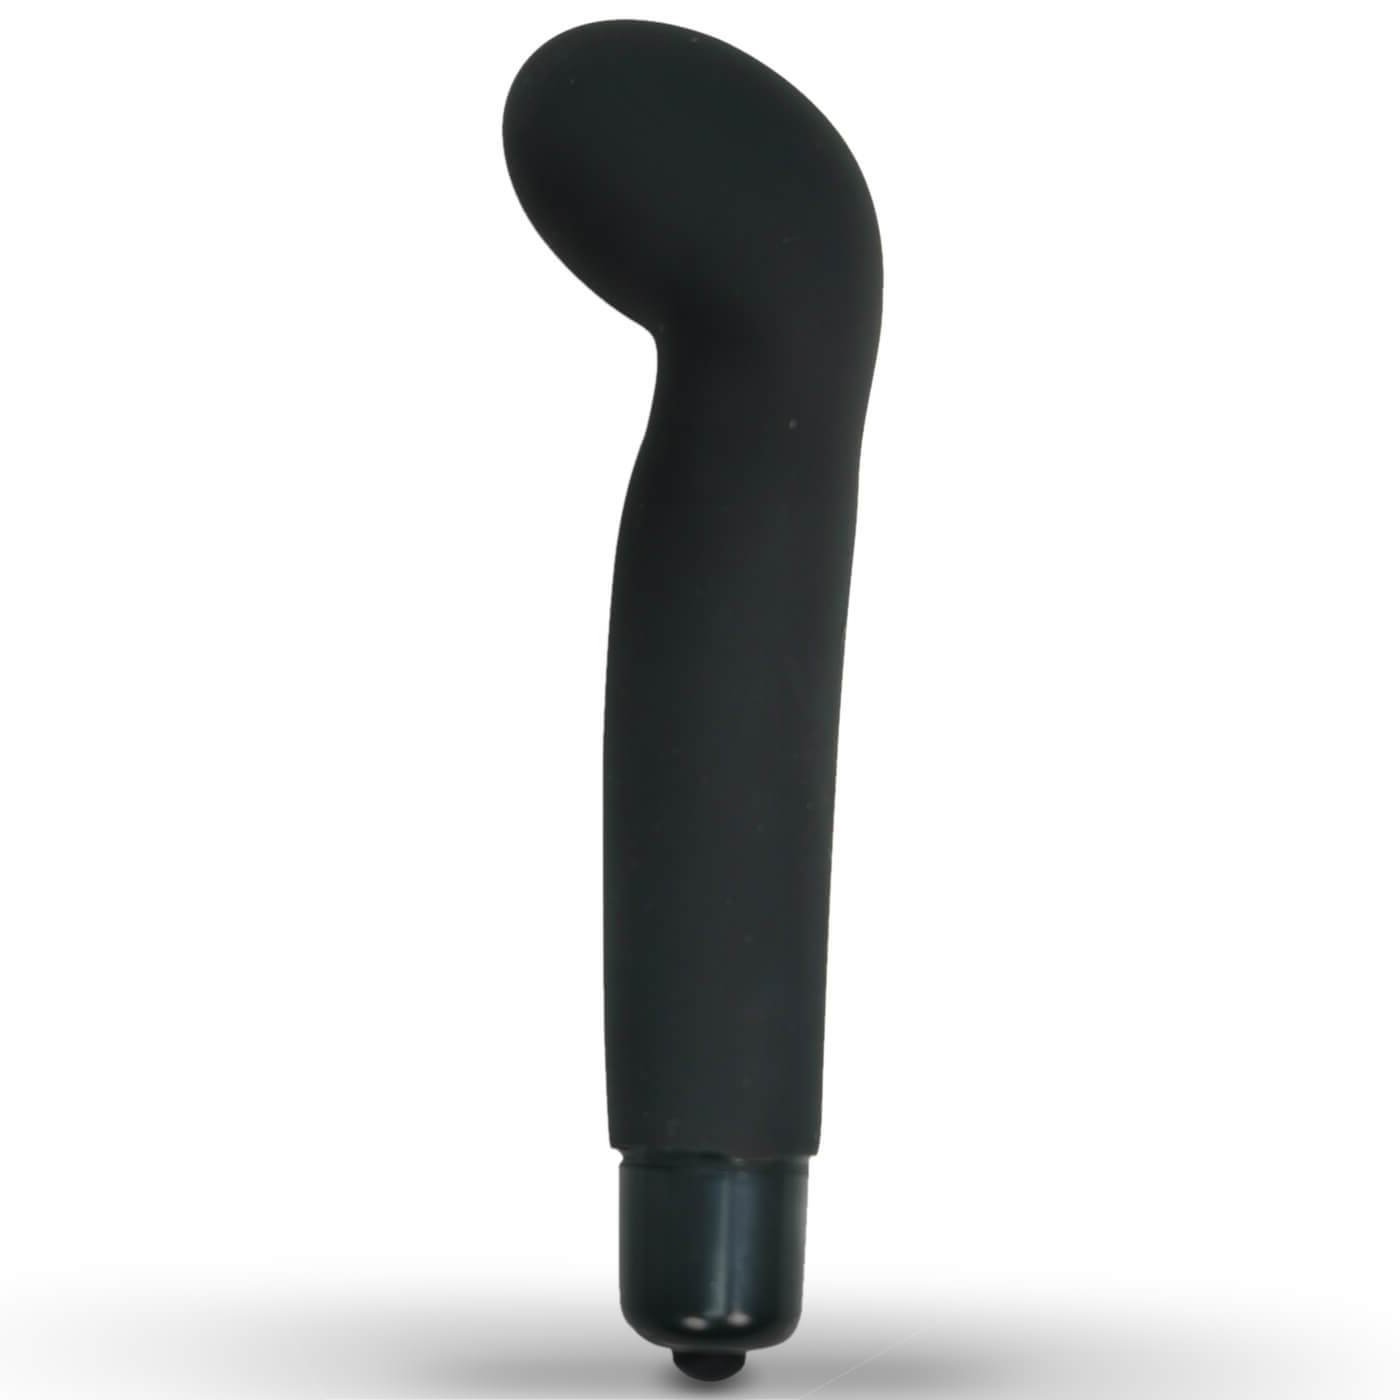 PLAY Petite Powerful Silicone G-Spot Bullet